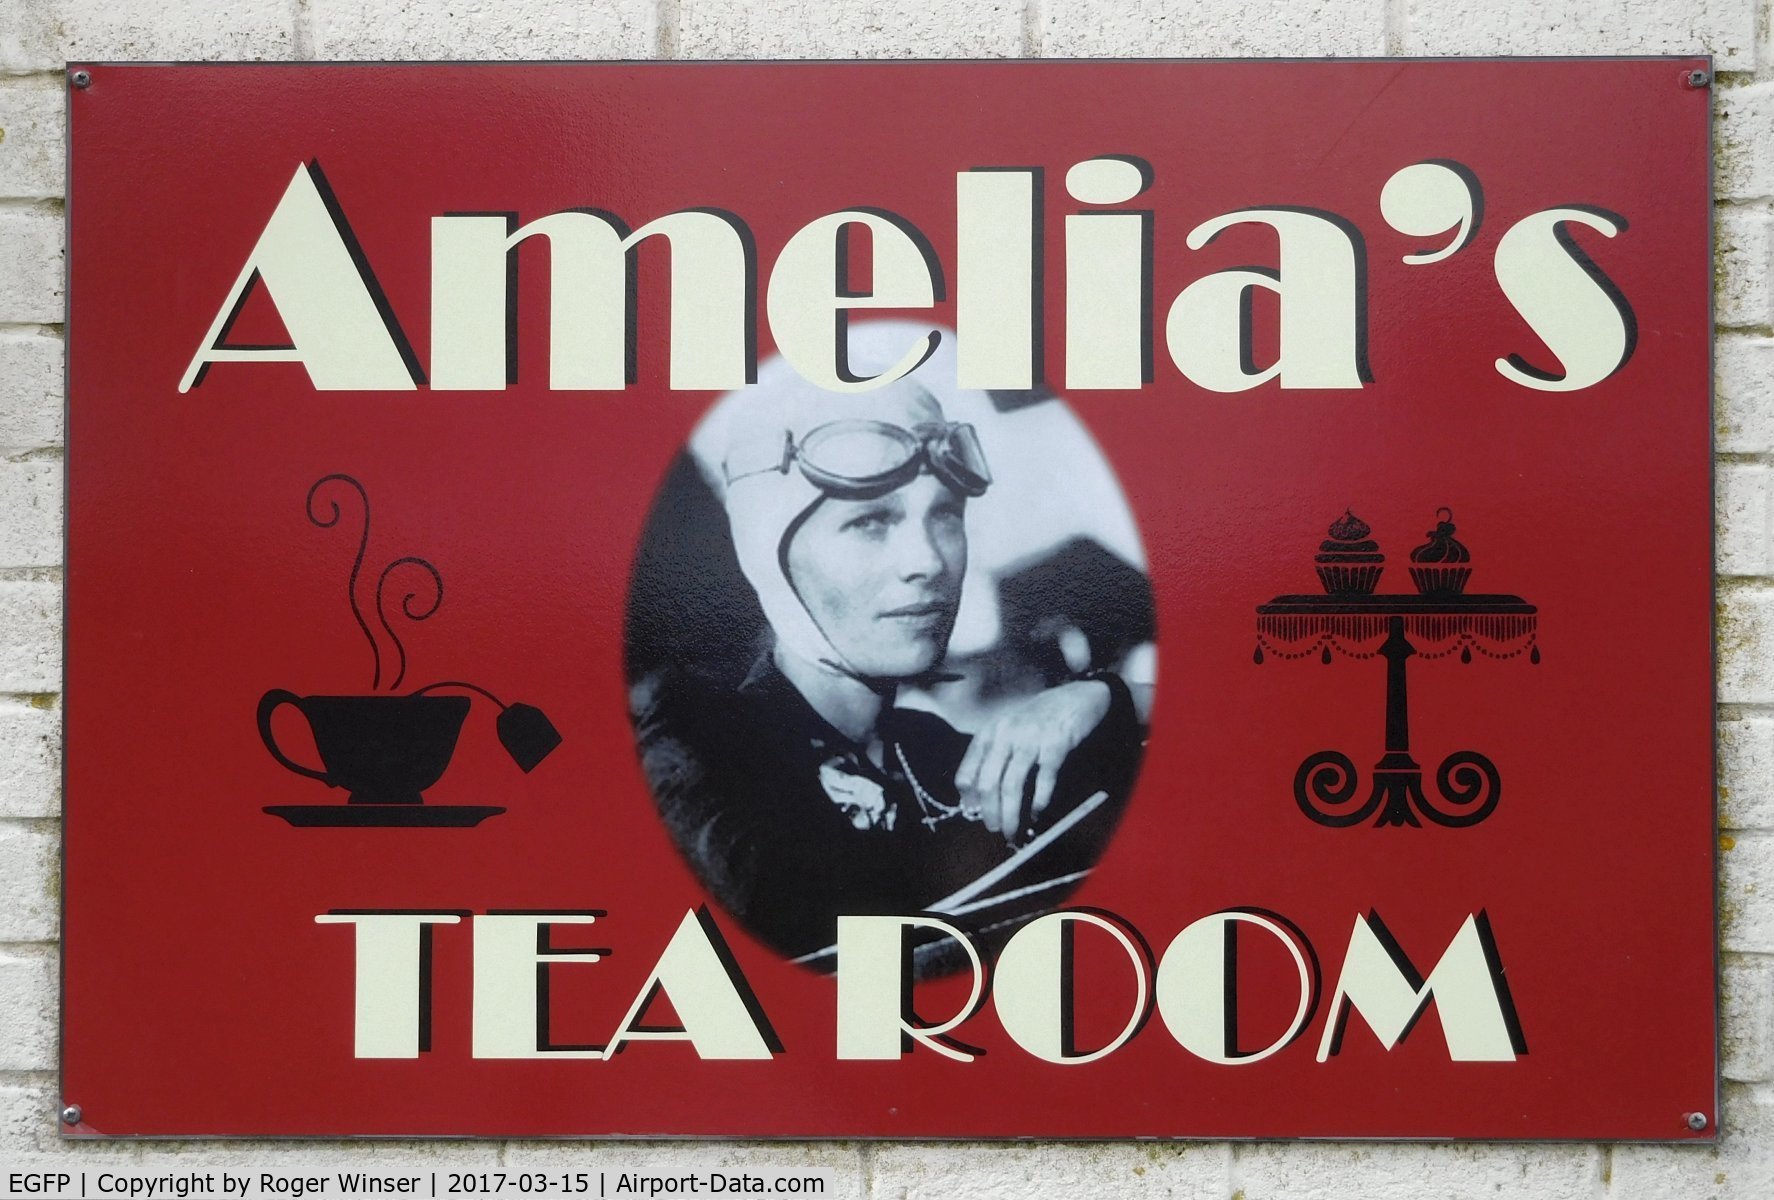 Pembrey Airport, Pembrey, Wales United Kingdom (EGFP) - New sign on the airport cafe, now Amelia's Tearoom.